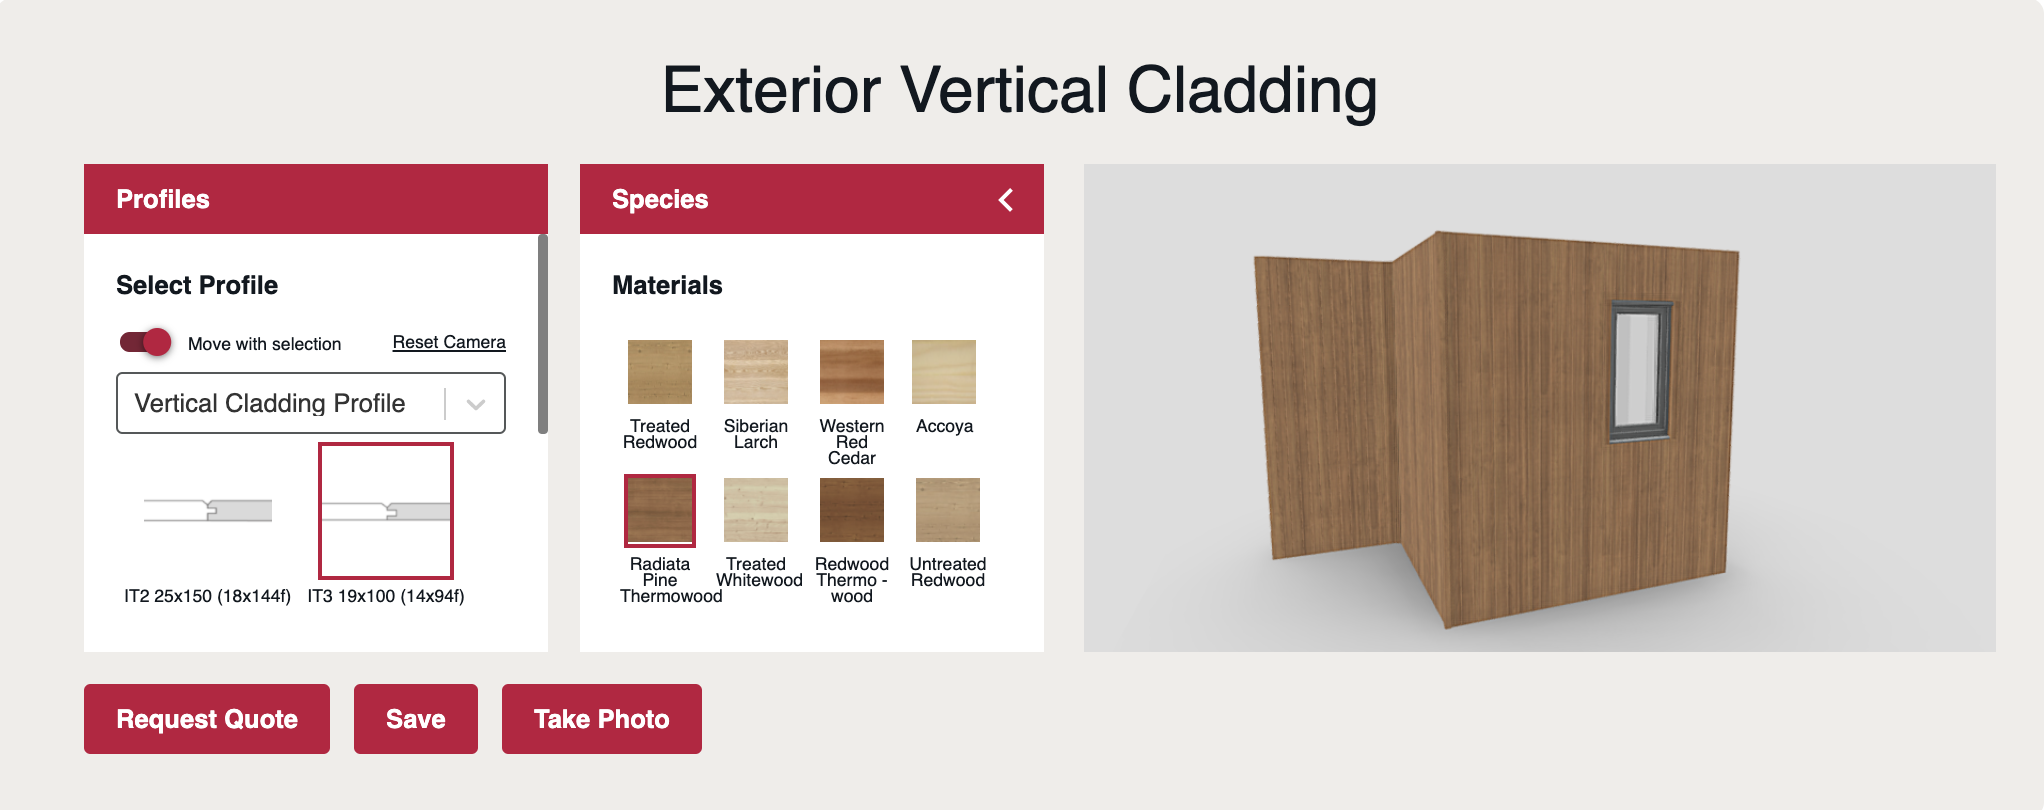 Exterior vertical cladding with selection of profiles & species